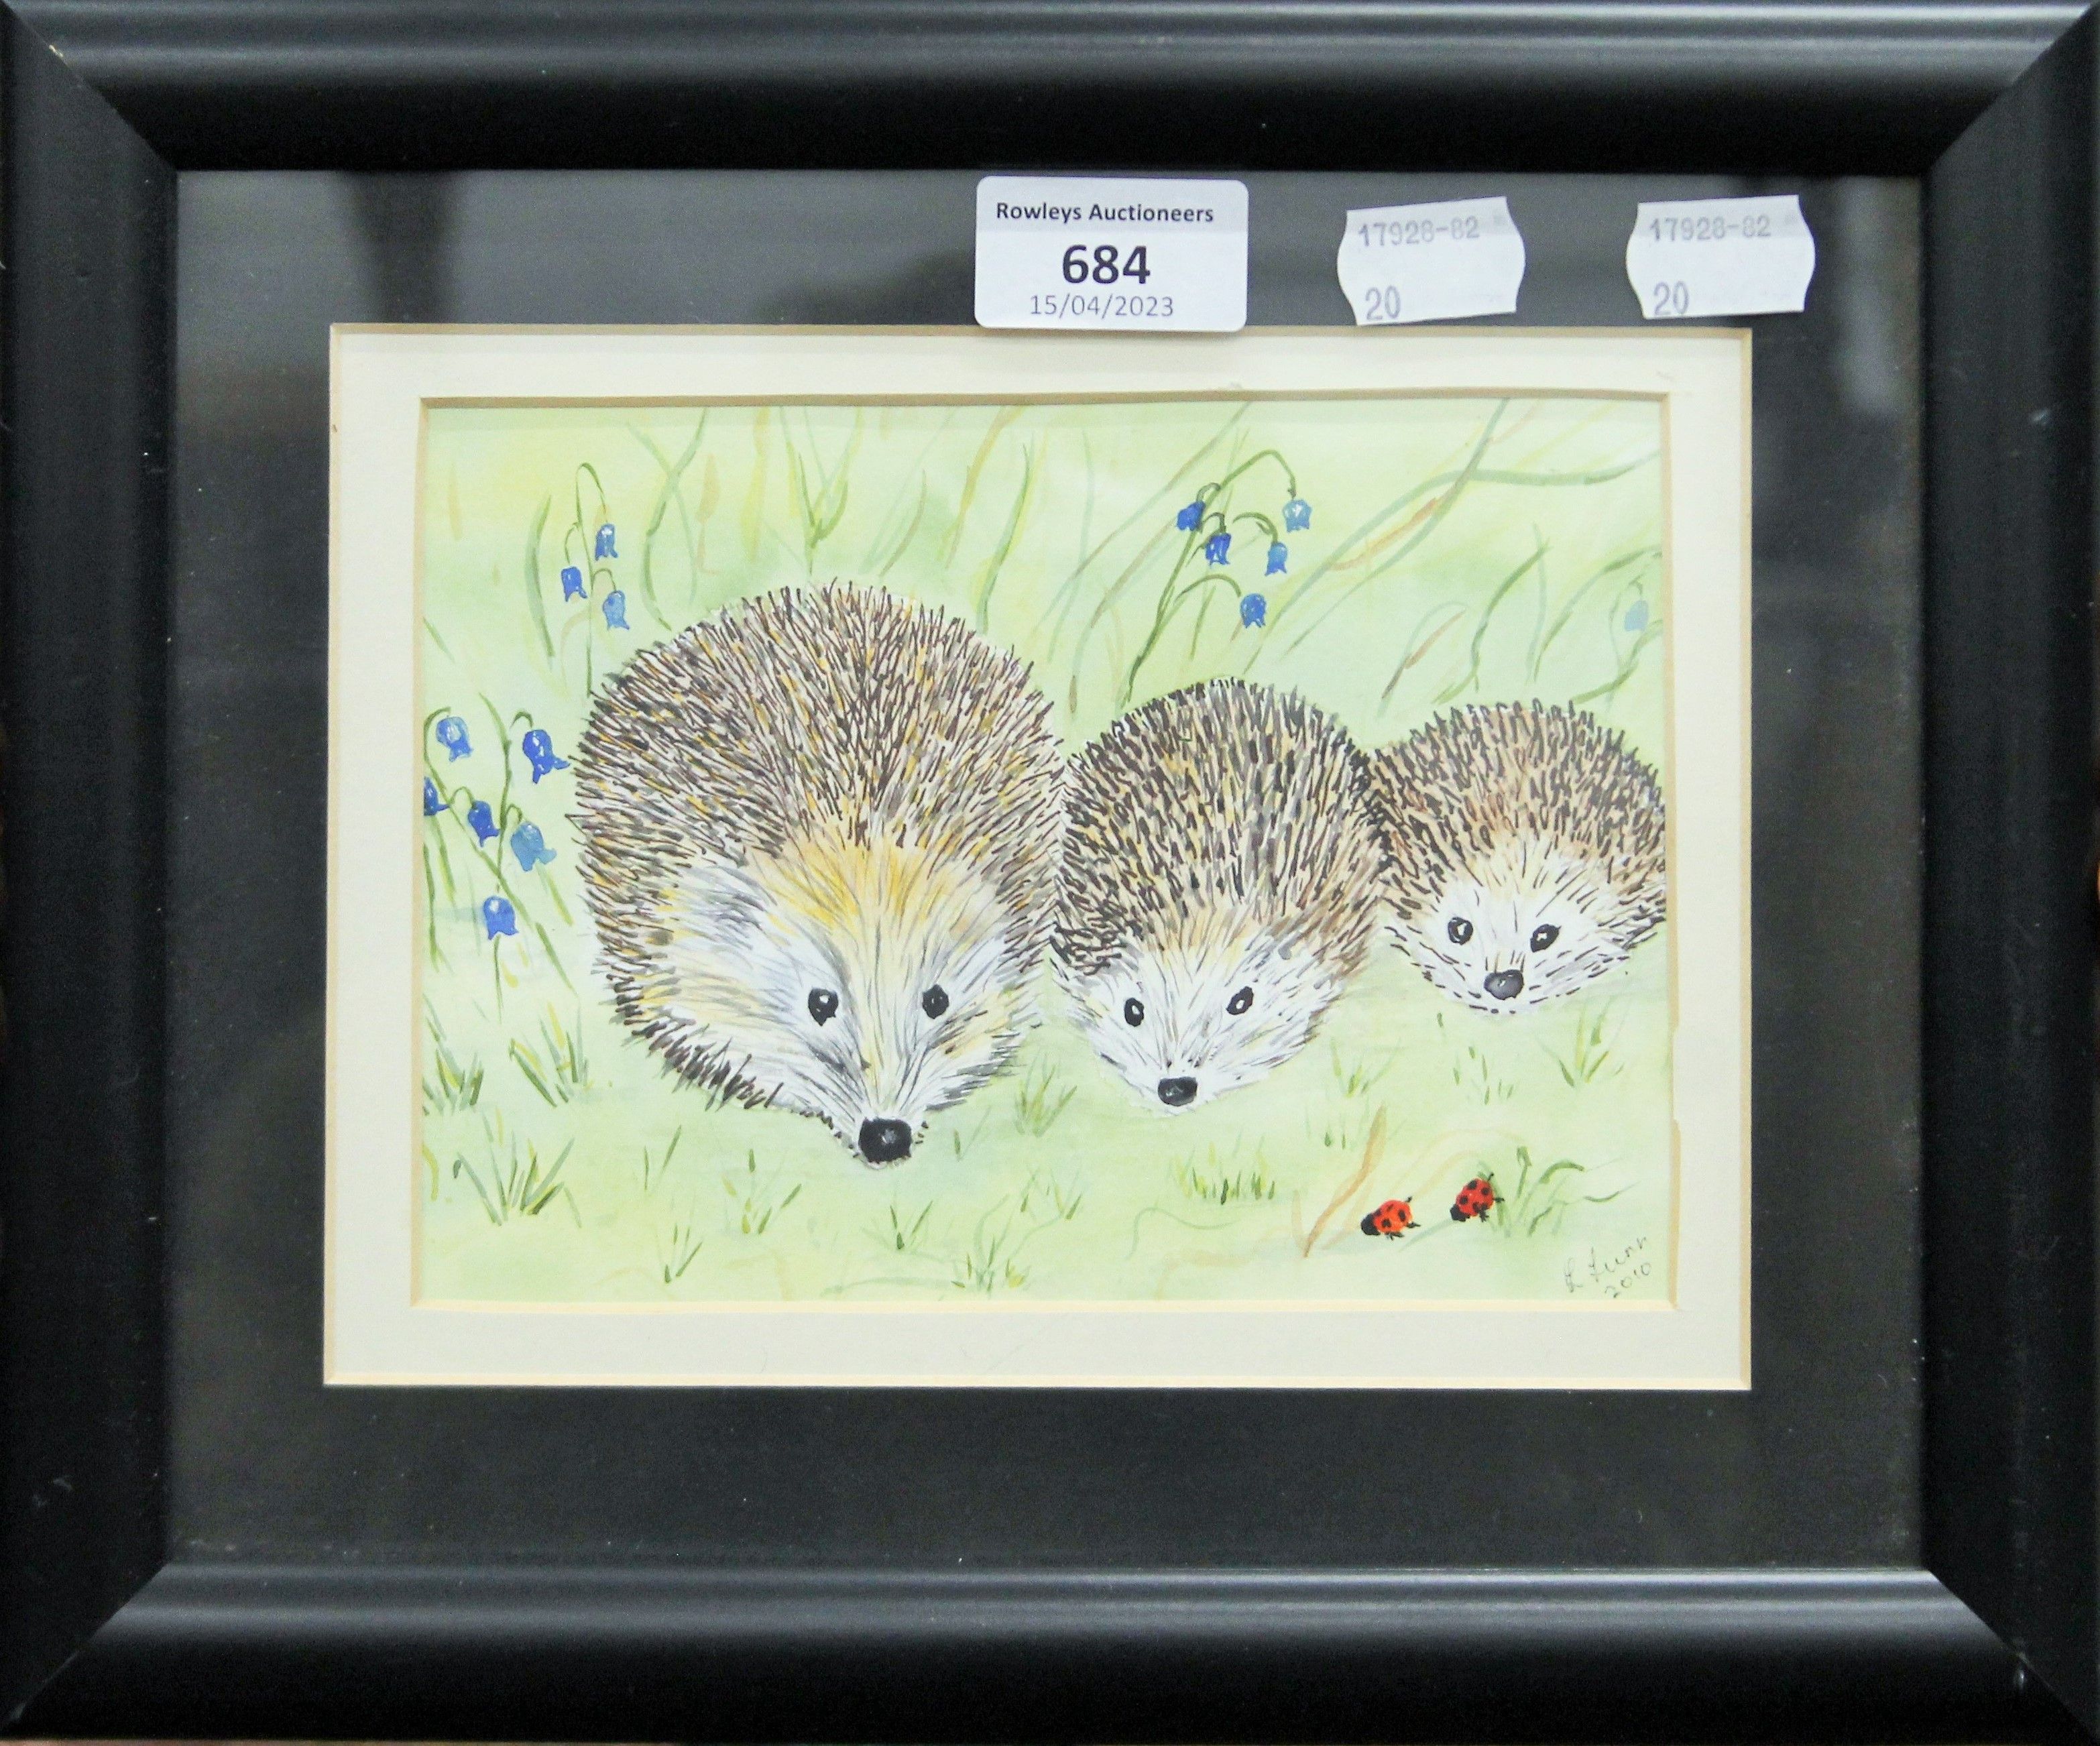 R LUNN, Three Hedgehogs, watercolour, framed and glazed. 17.5 x 12.5 cm. - Image 2 of 2